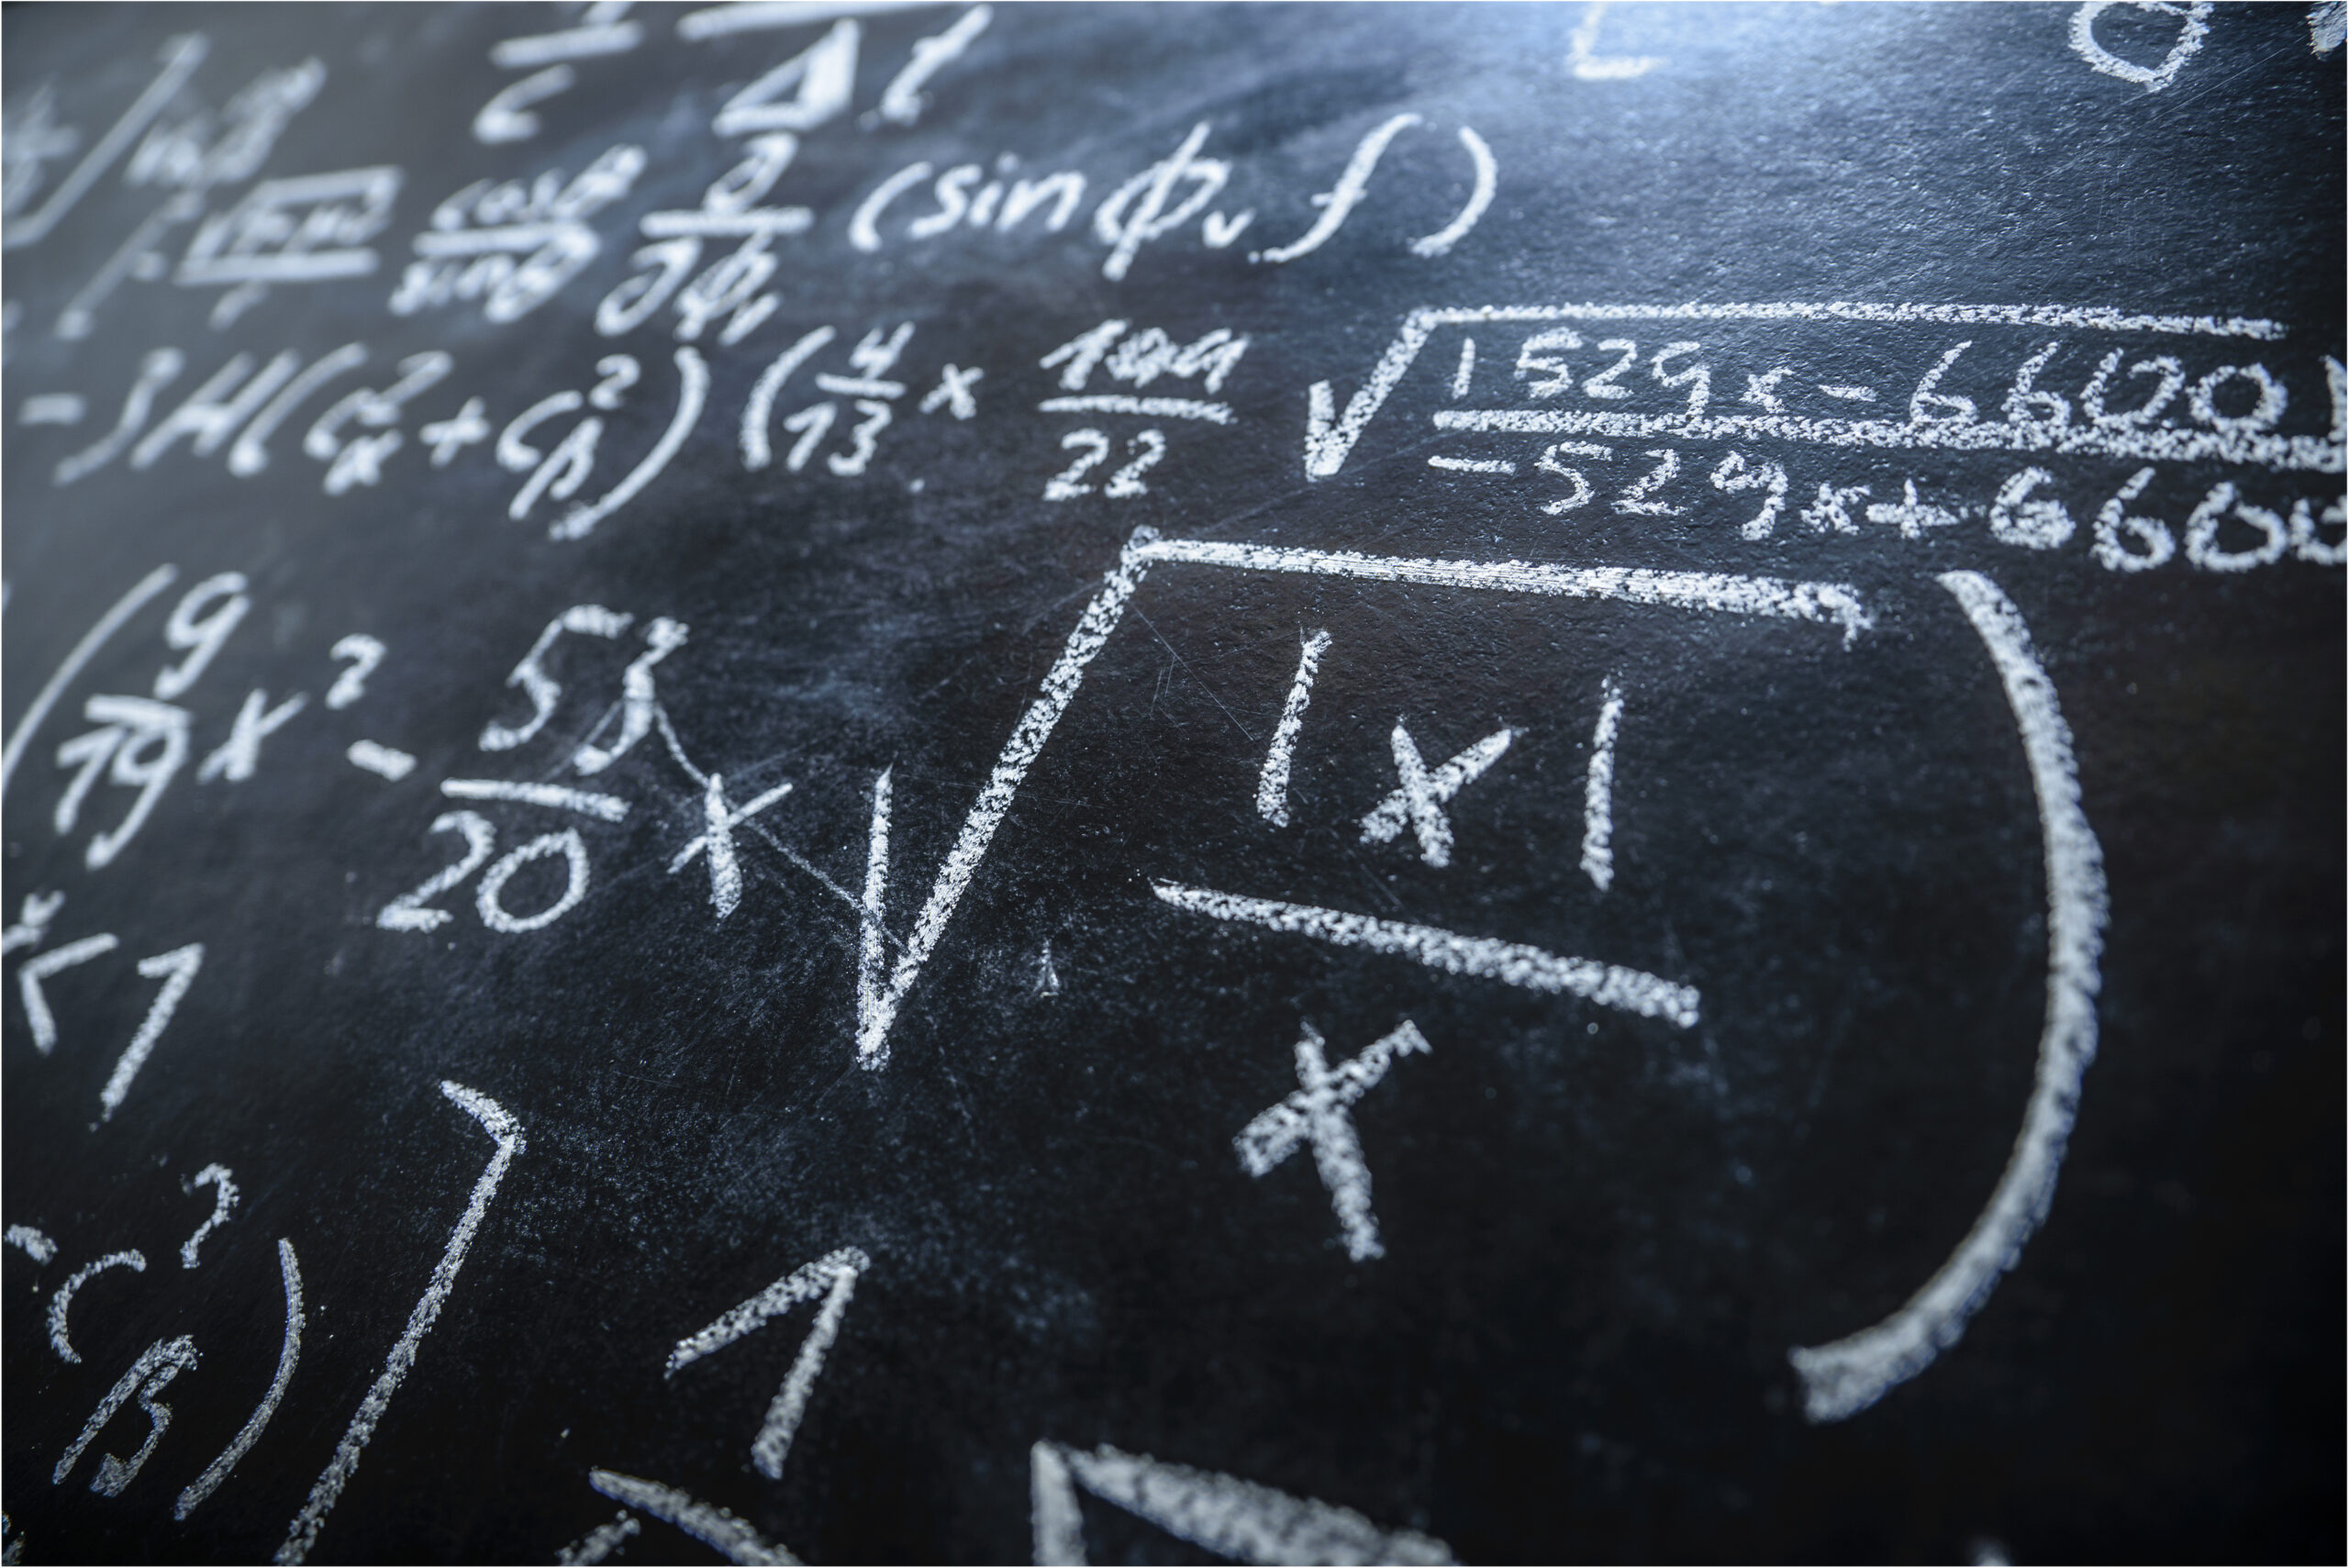 A blackboard filled with formulas and equations